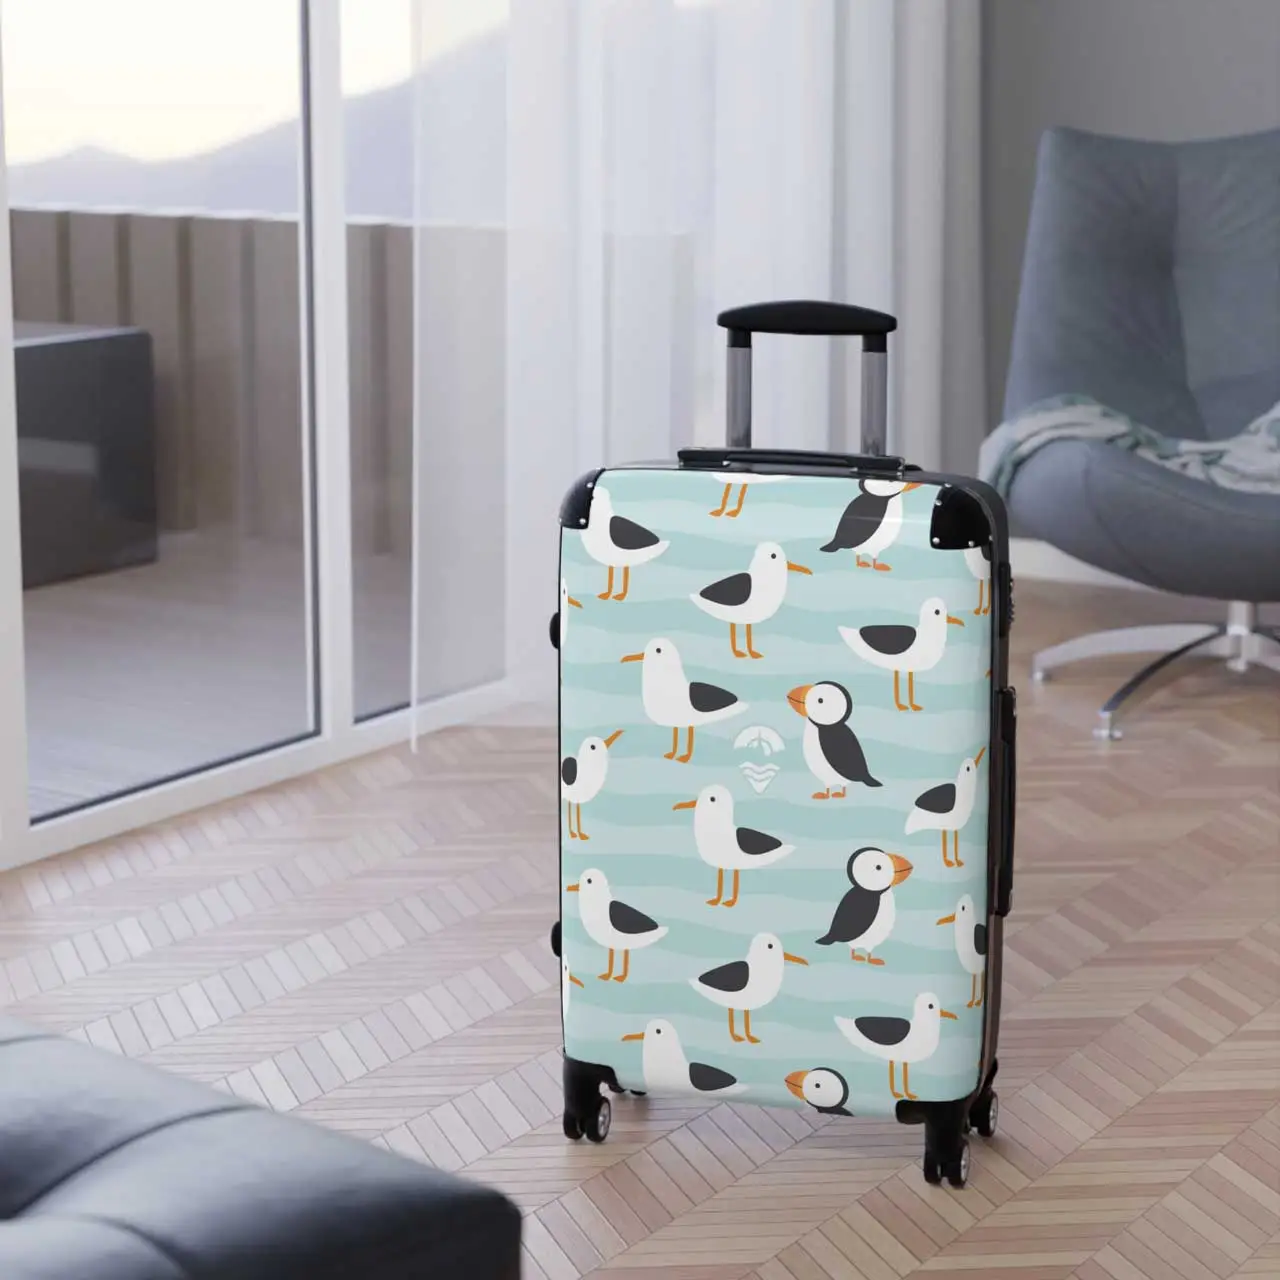 Puffins and Seagulls Travel Cases - Whimsical Pattern Luggage for Tenby Enthusiasts